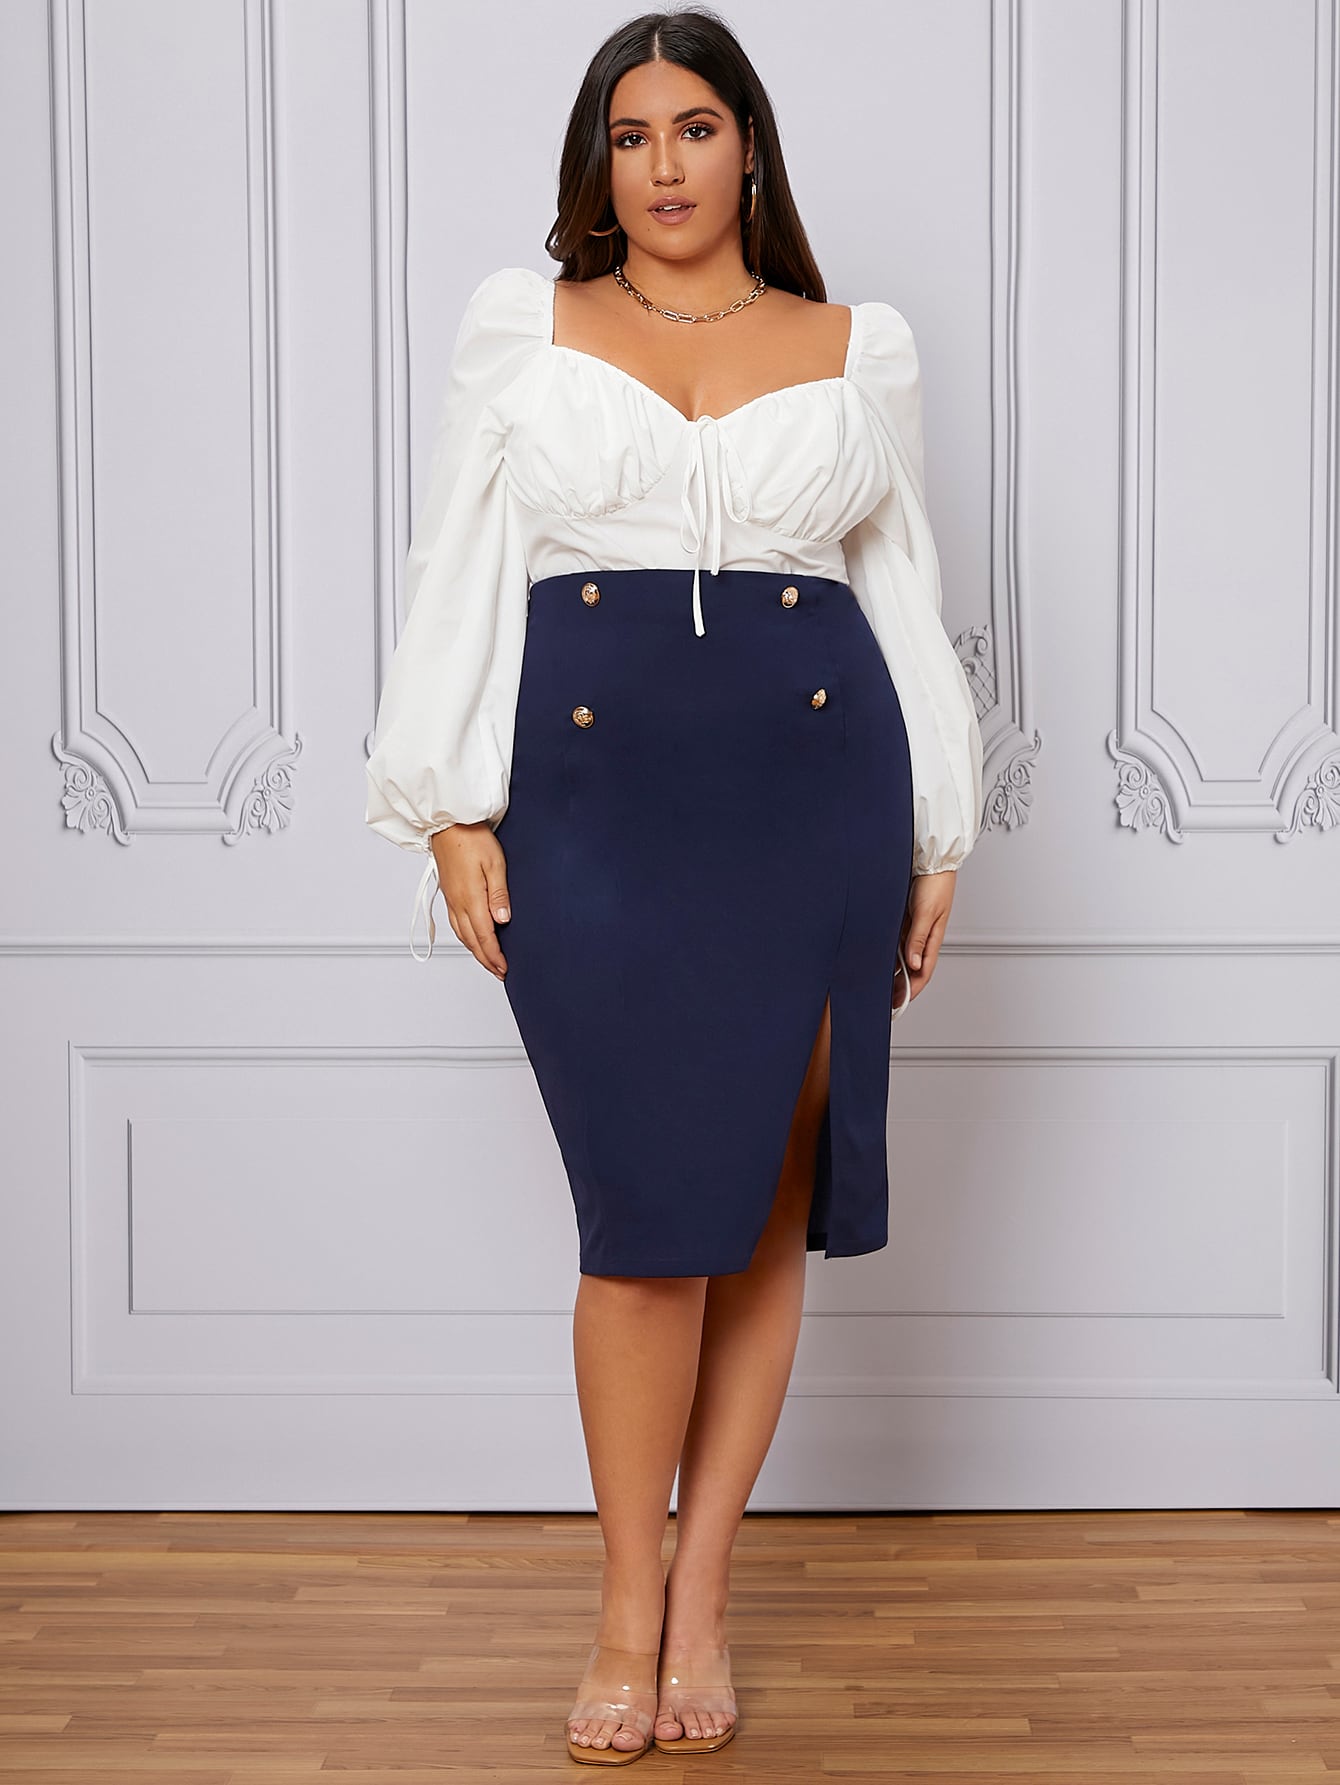 Plus Size Skirts Manufacturers